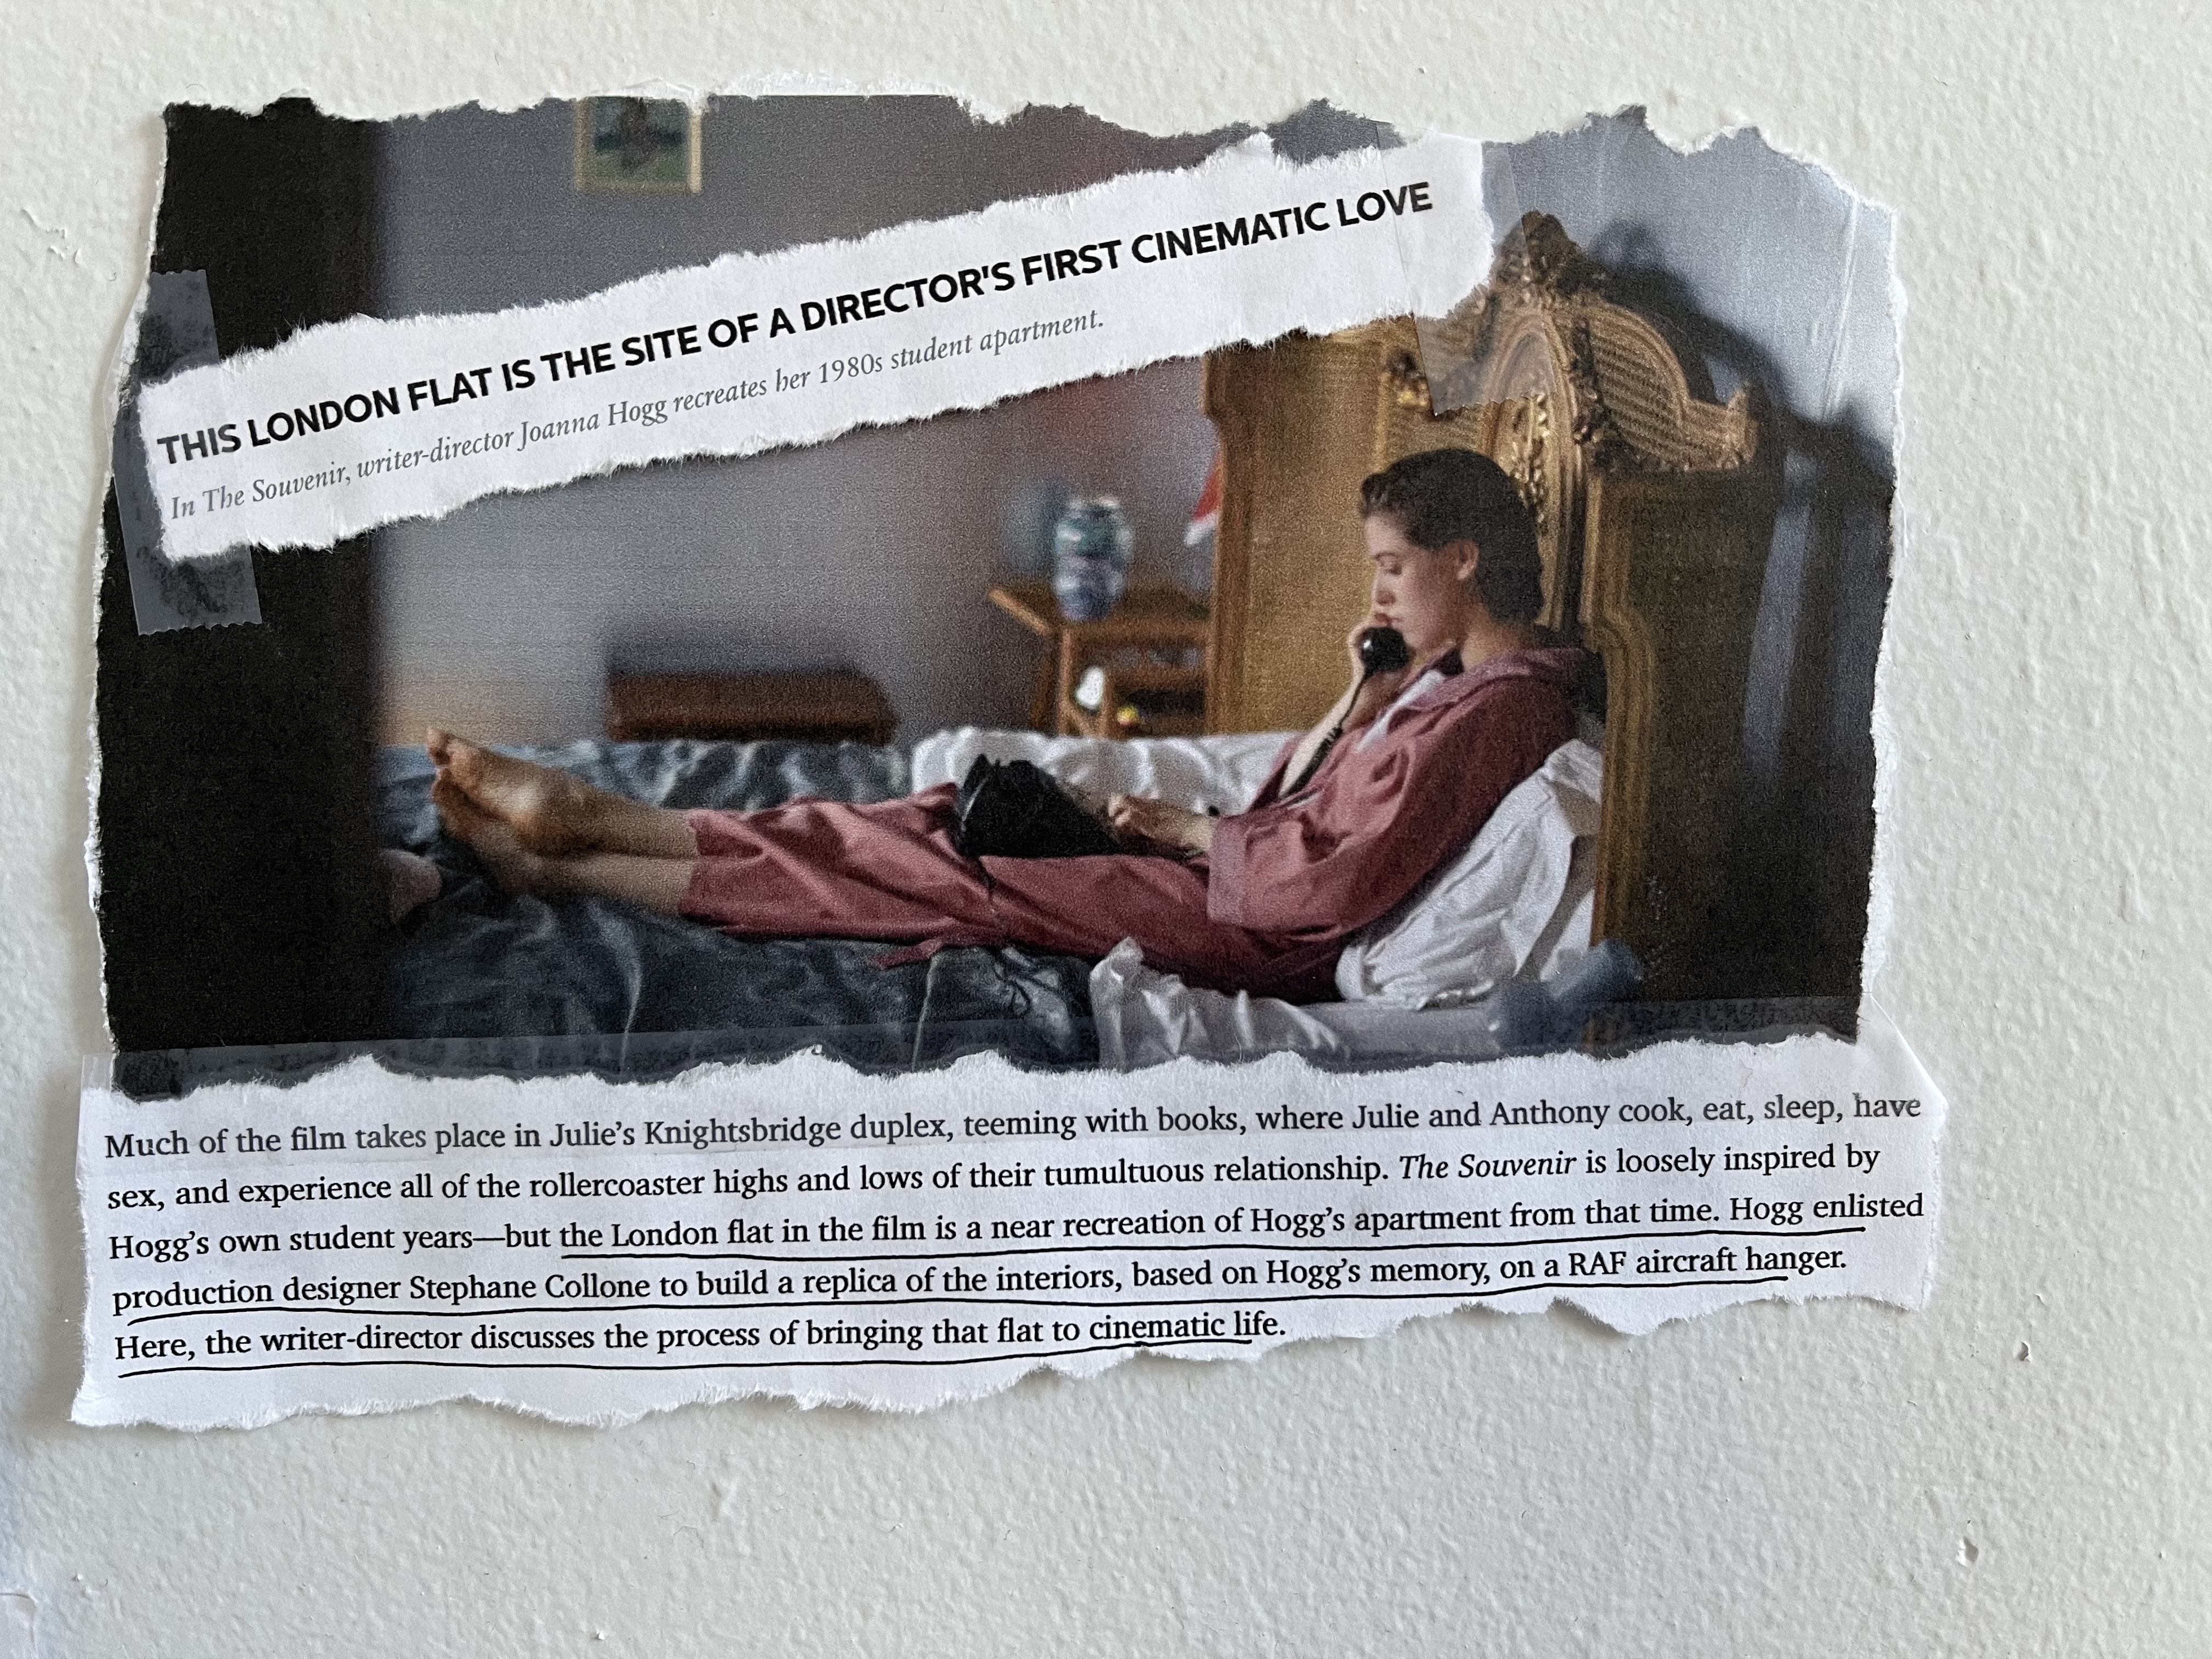 Cutouts from a magazine article are taped to wall. A photo shows a still from the film The Souvenir, of the young woman protagonist sitting on her bed on the telephone. The text reads:

This London Flat is the Site of a Director's First Cinematic Love
In The Souvenir, writer-director Joanna Hogg recreates her 1980s student apartment.

Much of the film takes place in Julie's Knightsbridge duplex, teeming with books, where Julie and Anthony cook, eat, sleep, have sex, and experience all of the rollercoaster highs and lows of their tumultuous relationship. The Souvenir is loosely inspired by Hogg's own student years — but the London flat in the film is a near recreation of Hogg's apartment from that time. Hogg enlisted production designer stephane Collone to build a replica of the interiors, based on Hogg's memory, on a RAF aircraft hanger. Here, the writer-director discusses the process of bringing that flat to cinematic life. 